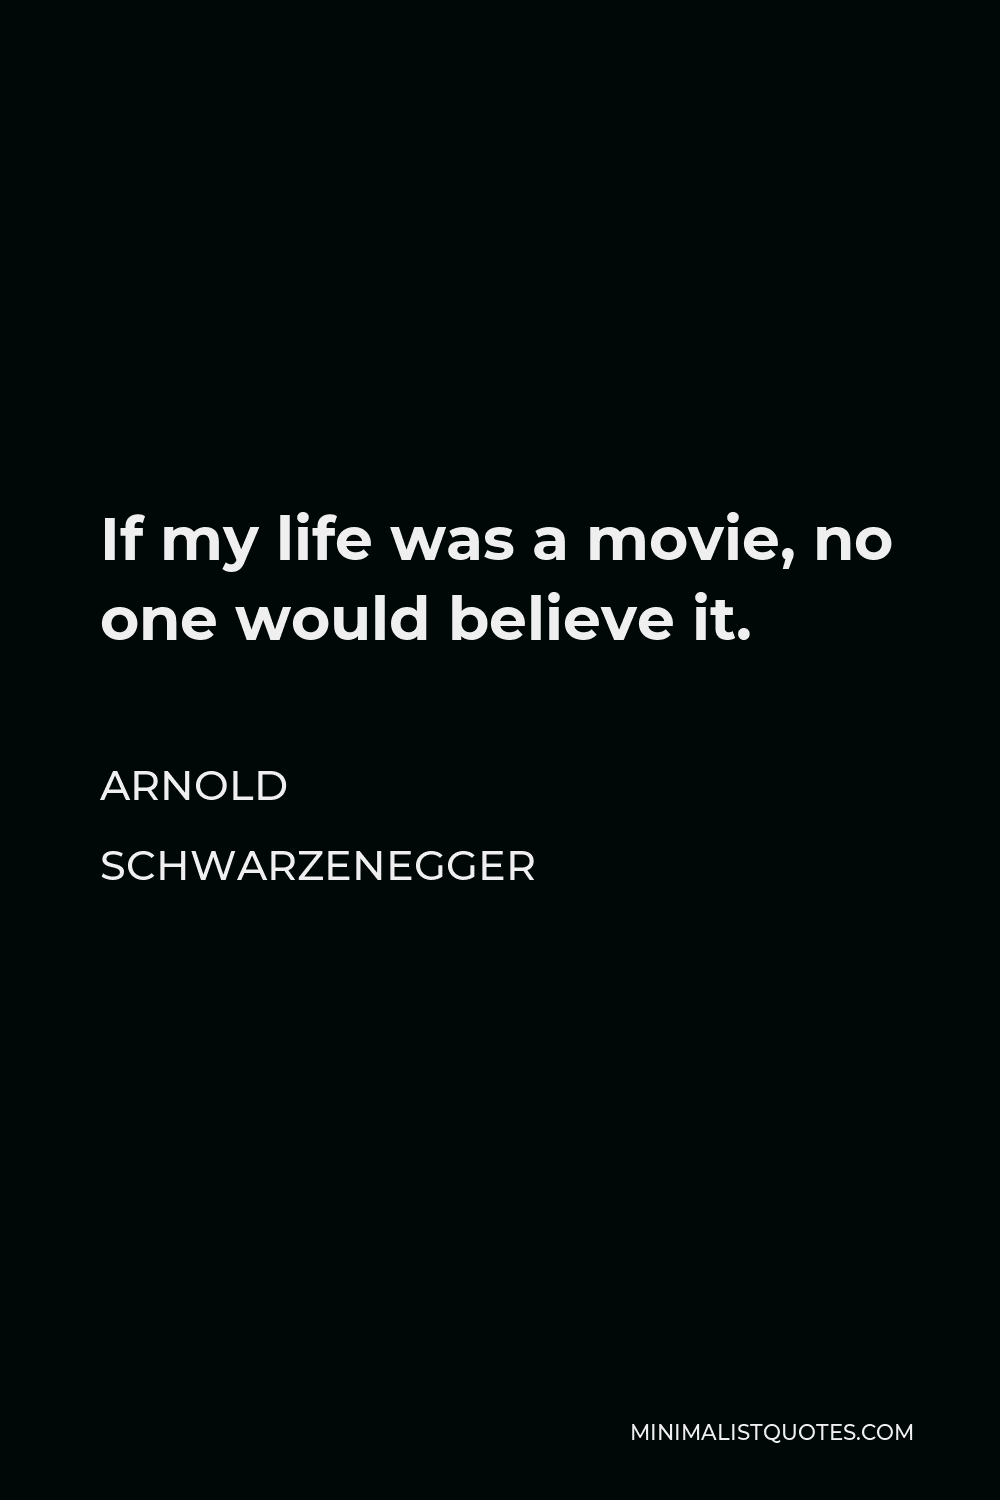 Arnold Schwarzenegger Quote: If my life was a movie, no one would believe  it.